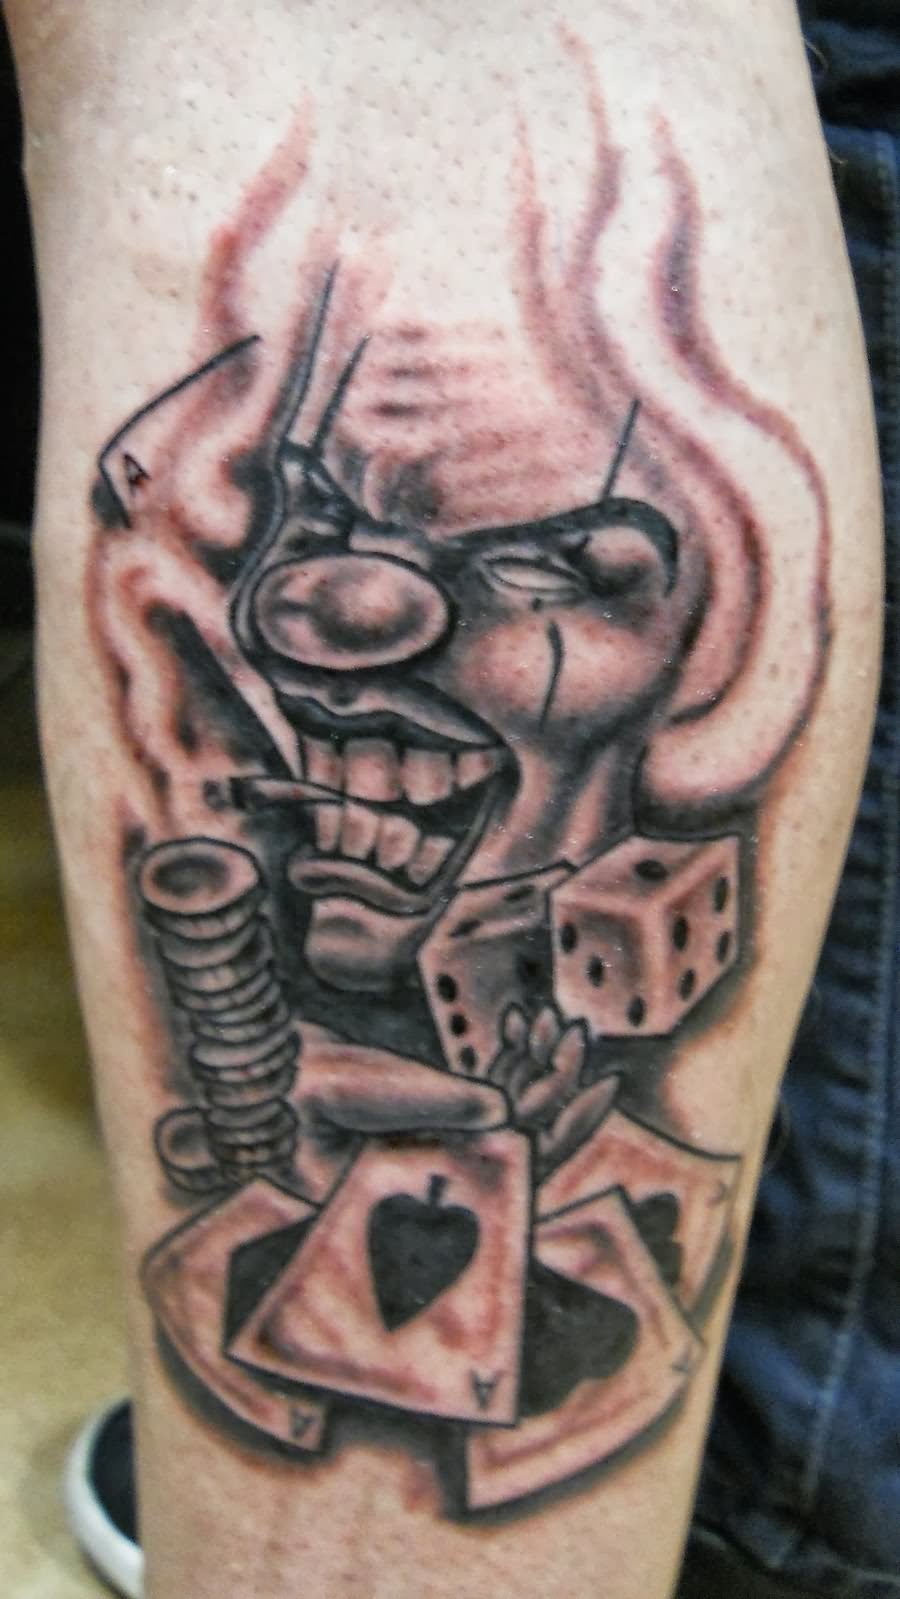 Gangster Clown With Playing Cards And Cubes Tattoo Design For Leg